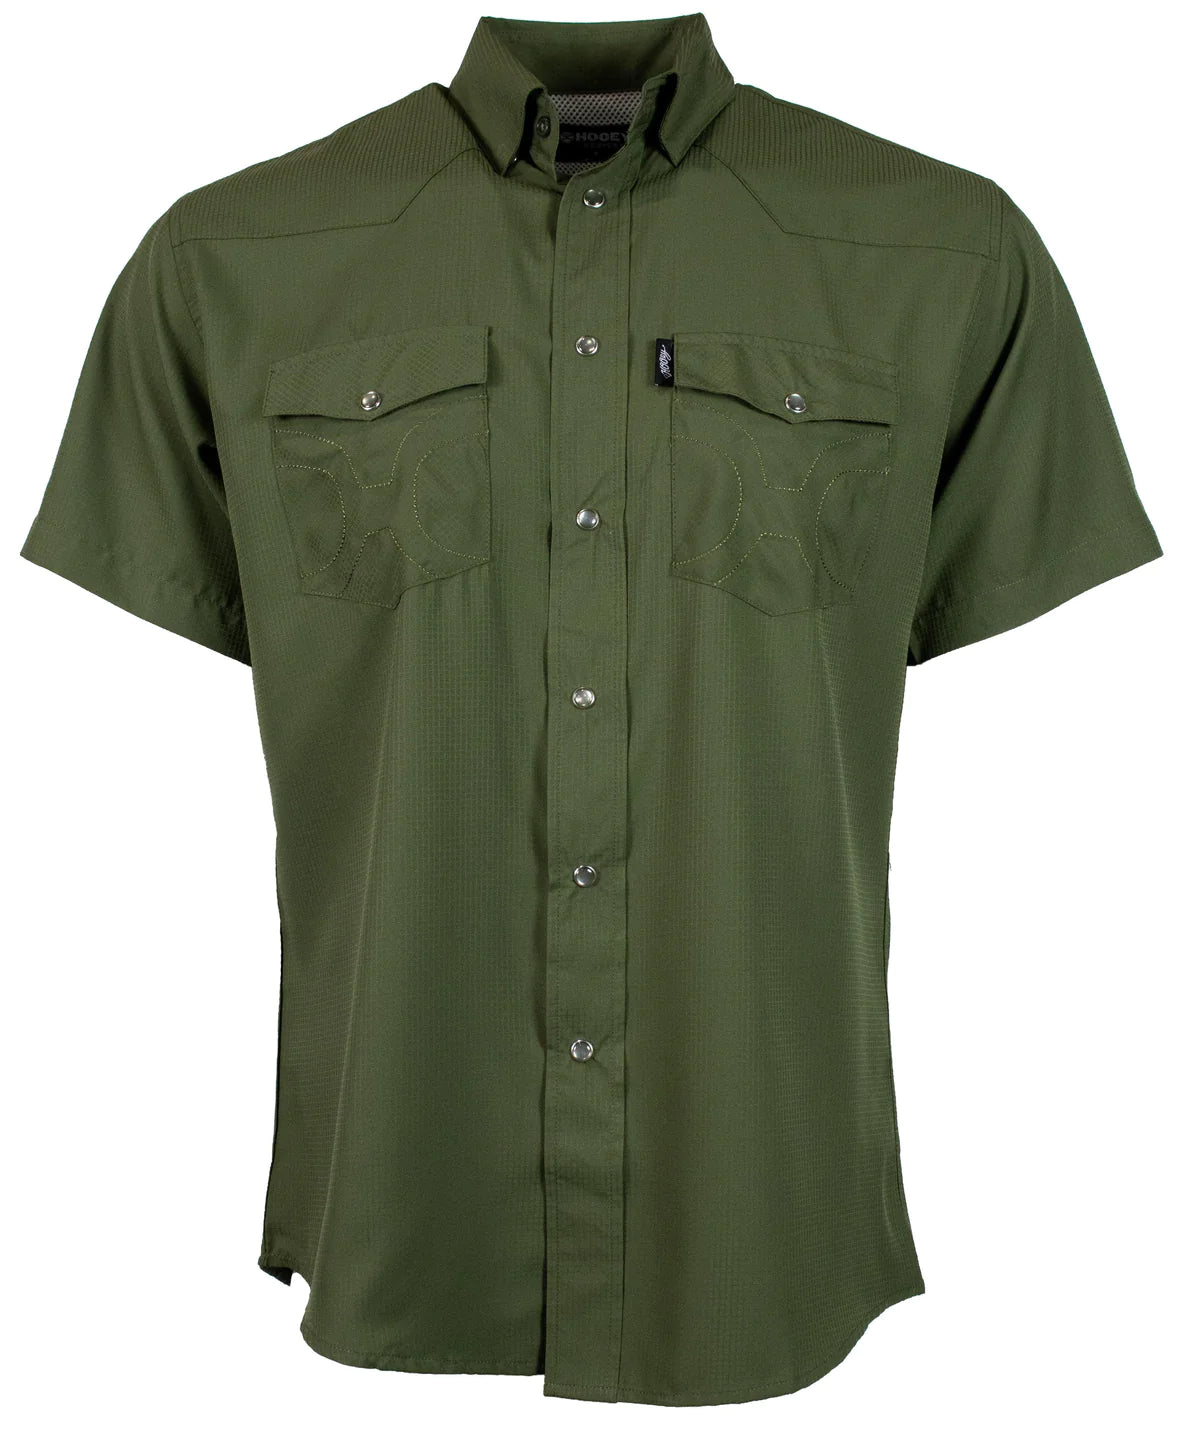 Sol Olive short sleeve pearl snap